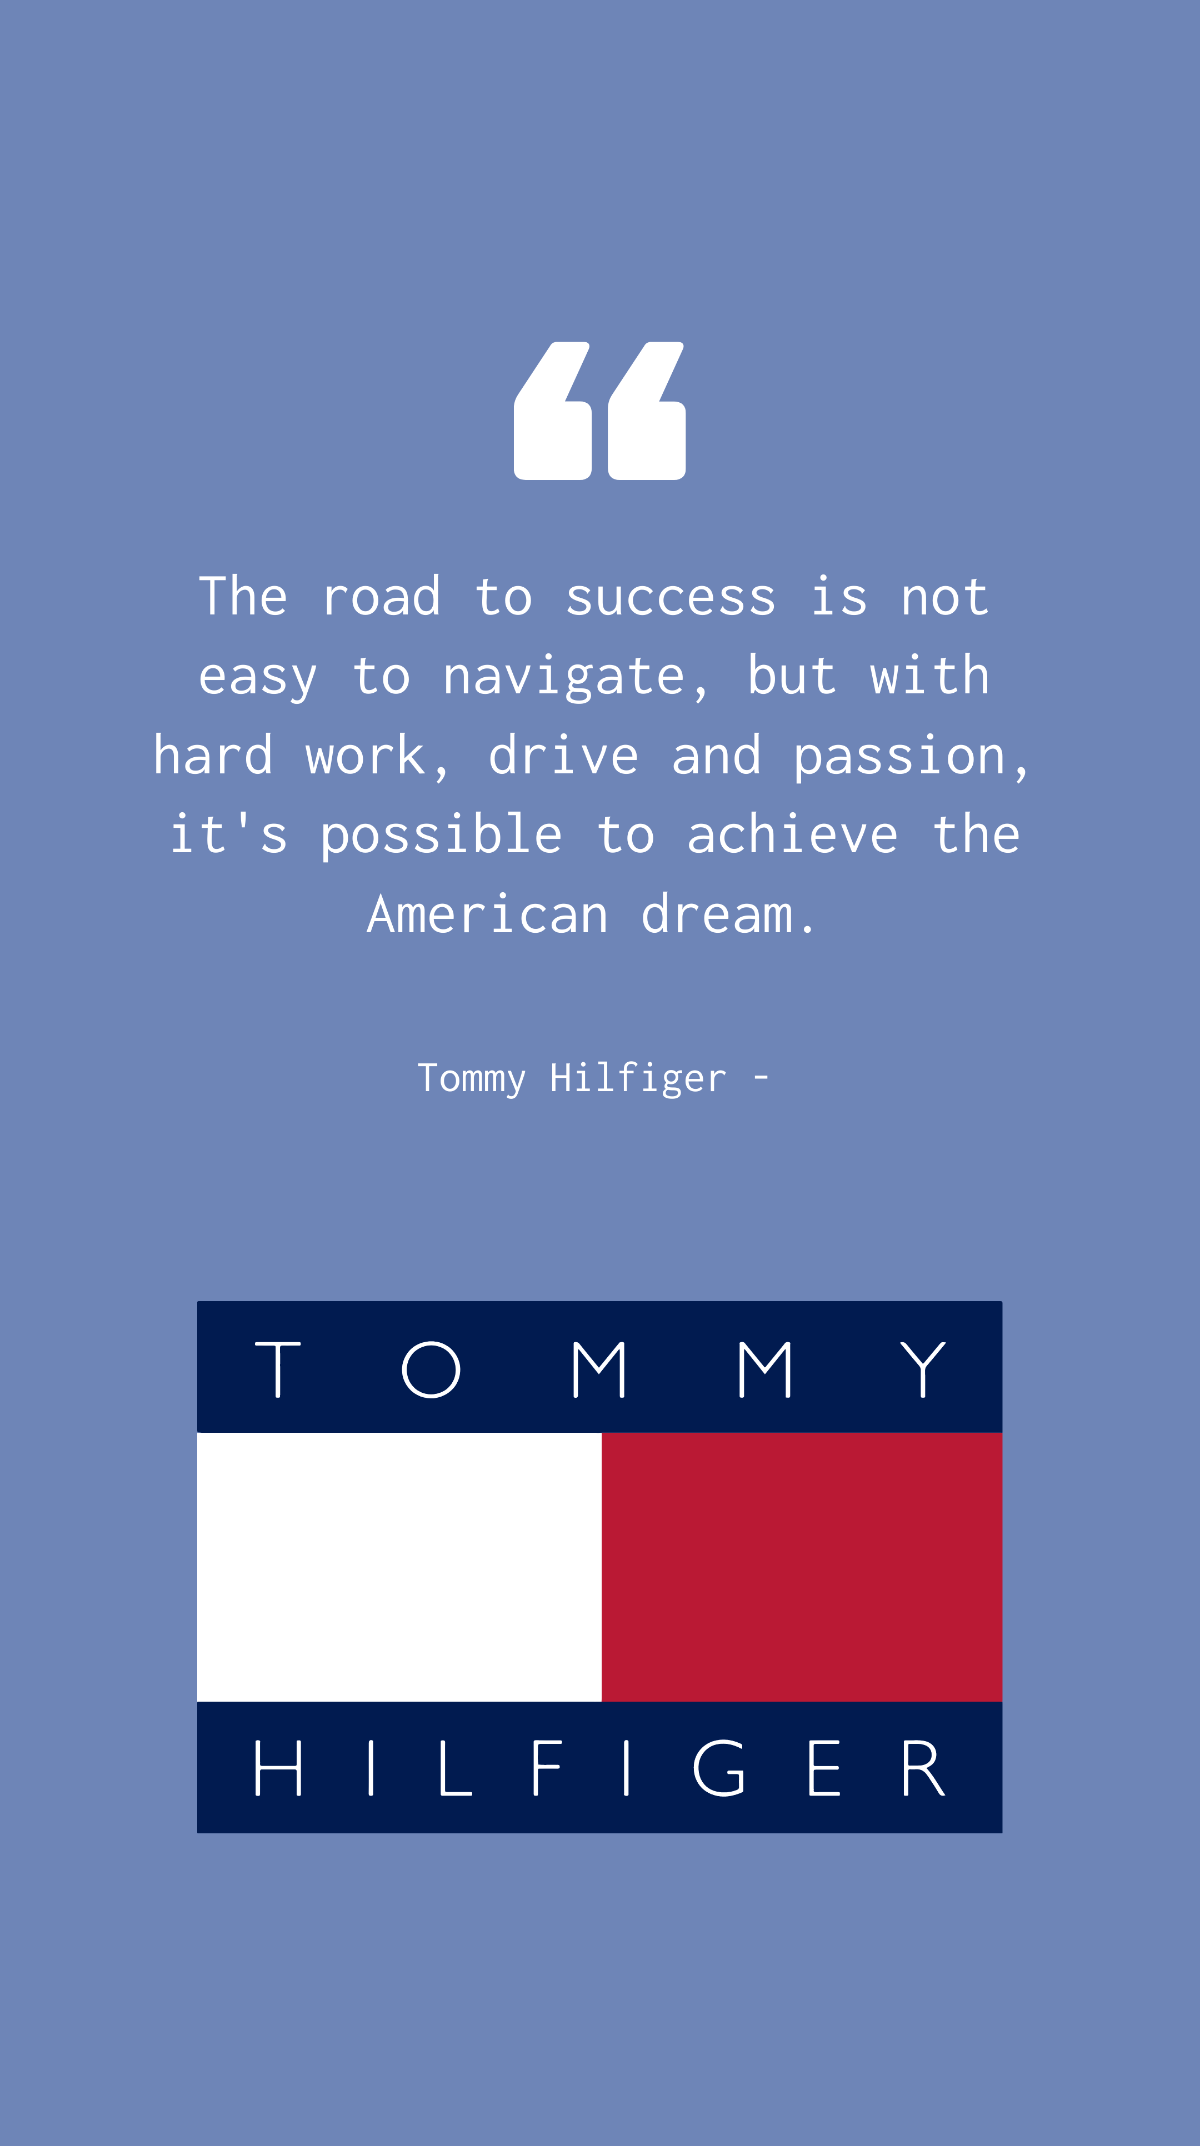 Tommy Hilfiger - The road to success is not easy to navigate, but with hard work, drive and passion, it's possible to achieve the American dream. Template